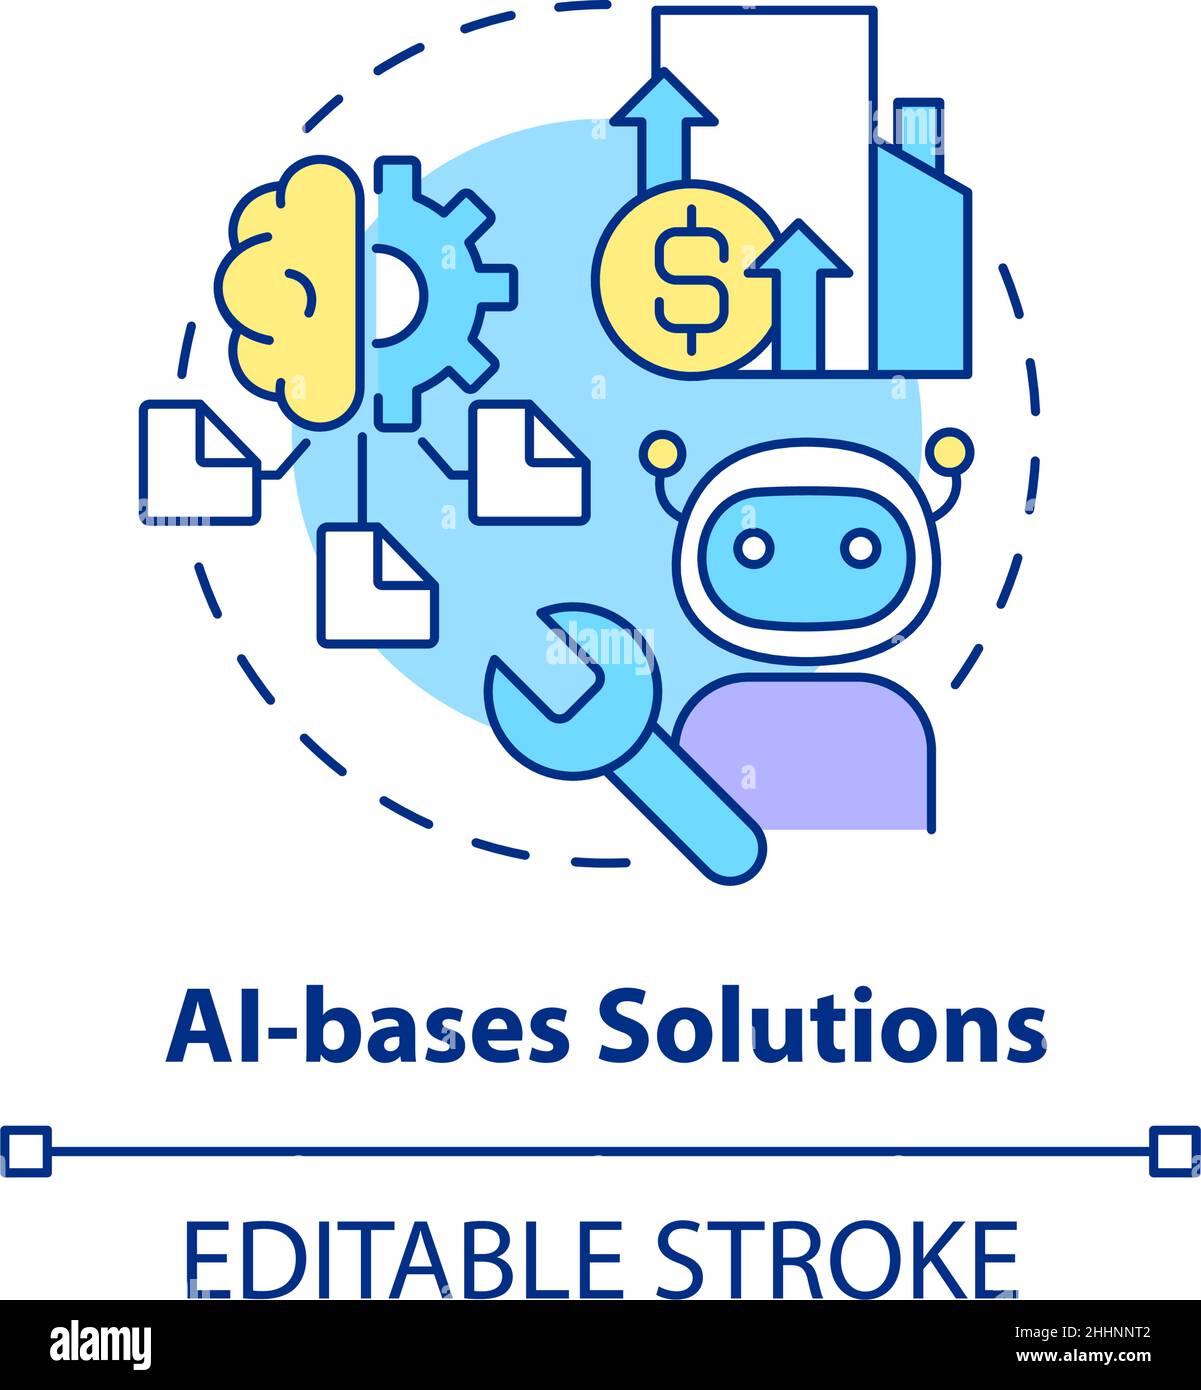 AI bases solutions concept icon Stock Vector